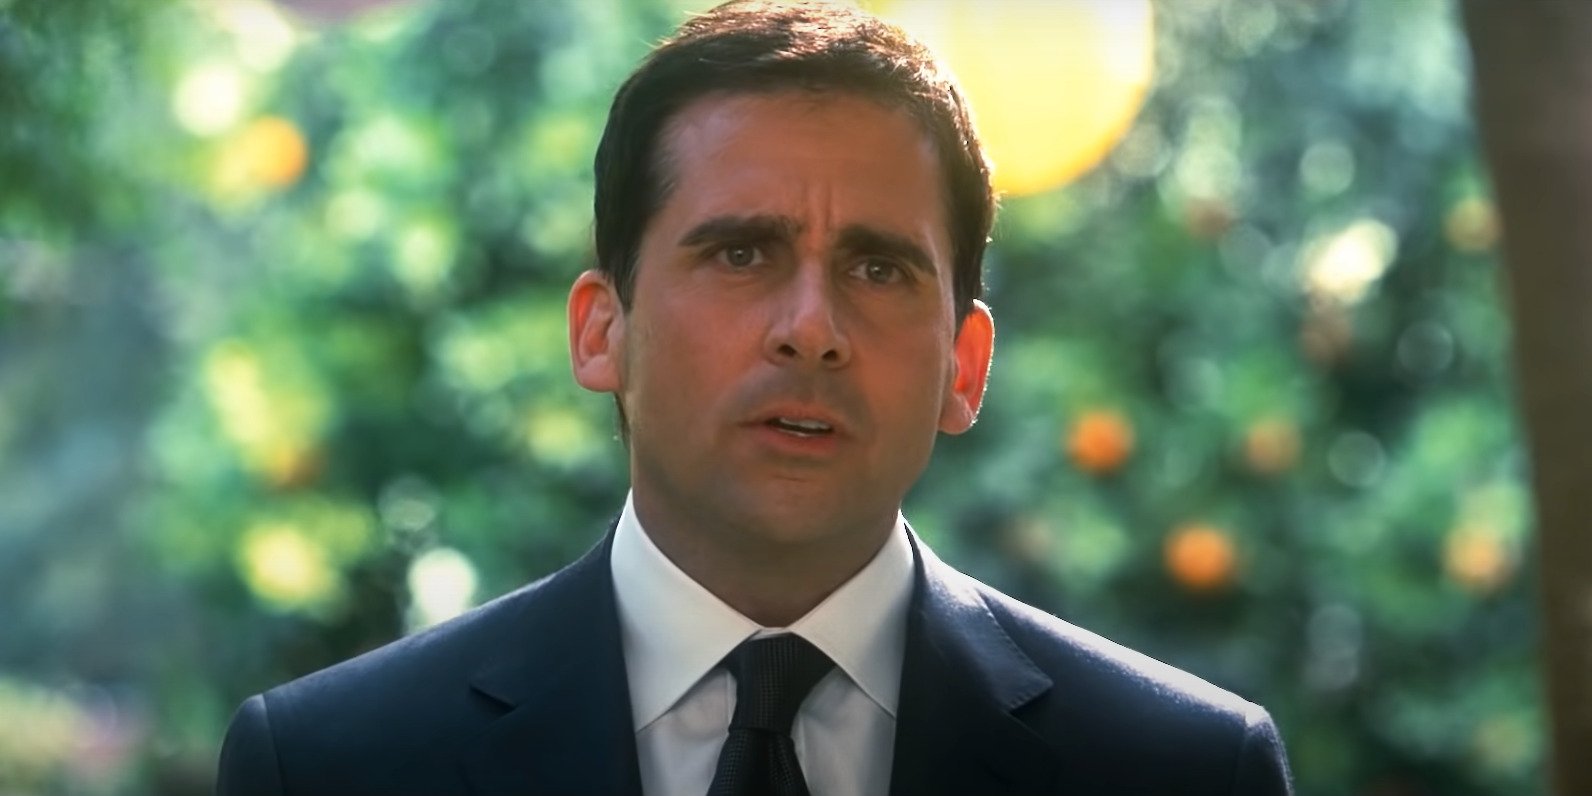 Is Crazy, Stupid, Love Based on a True Story?